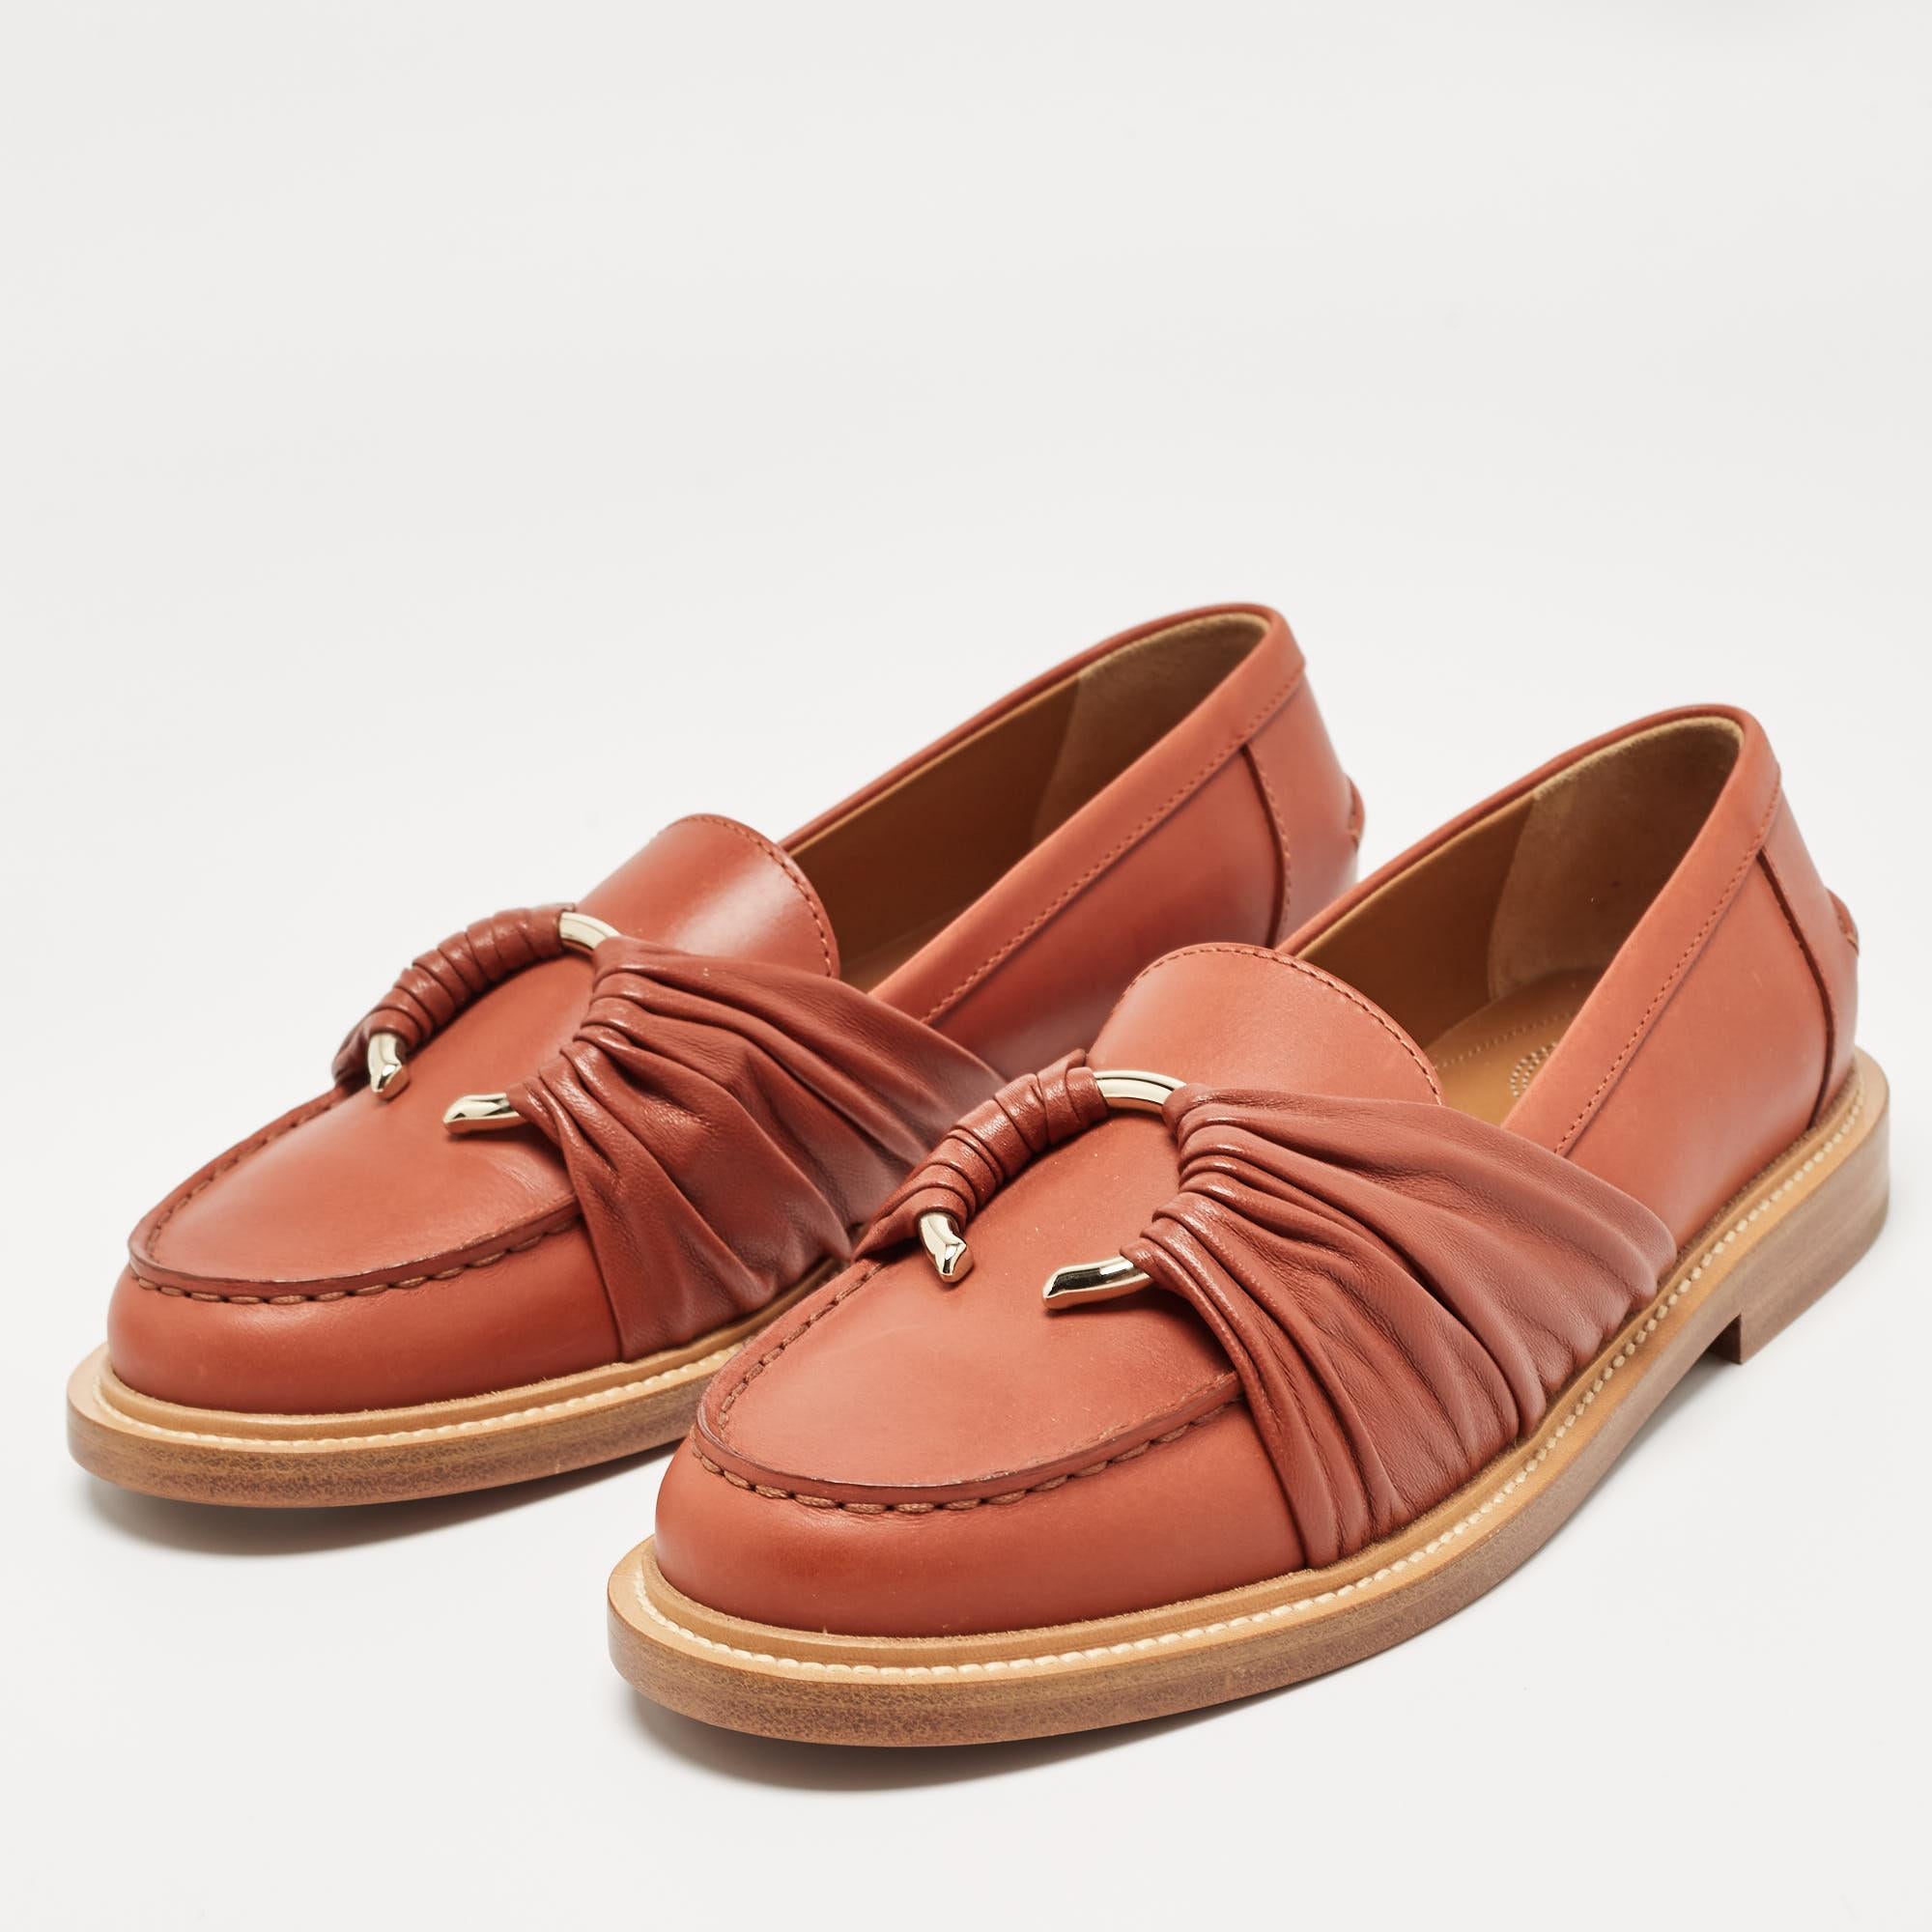 Chloe Brown Leather C Logo Loafers Size 37 For Sale 1